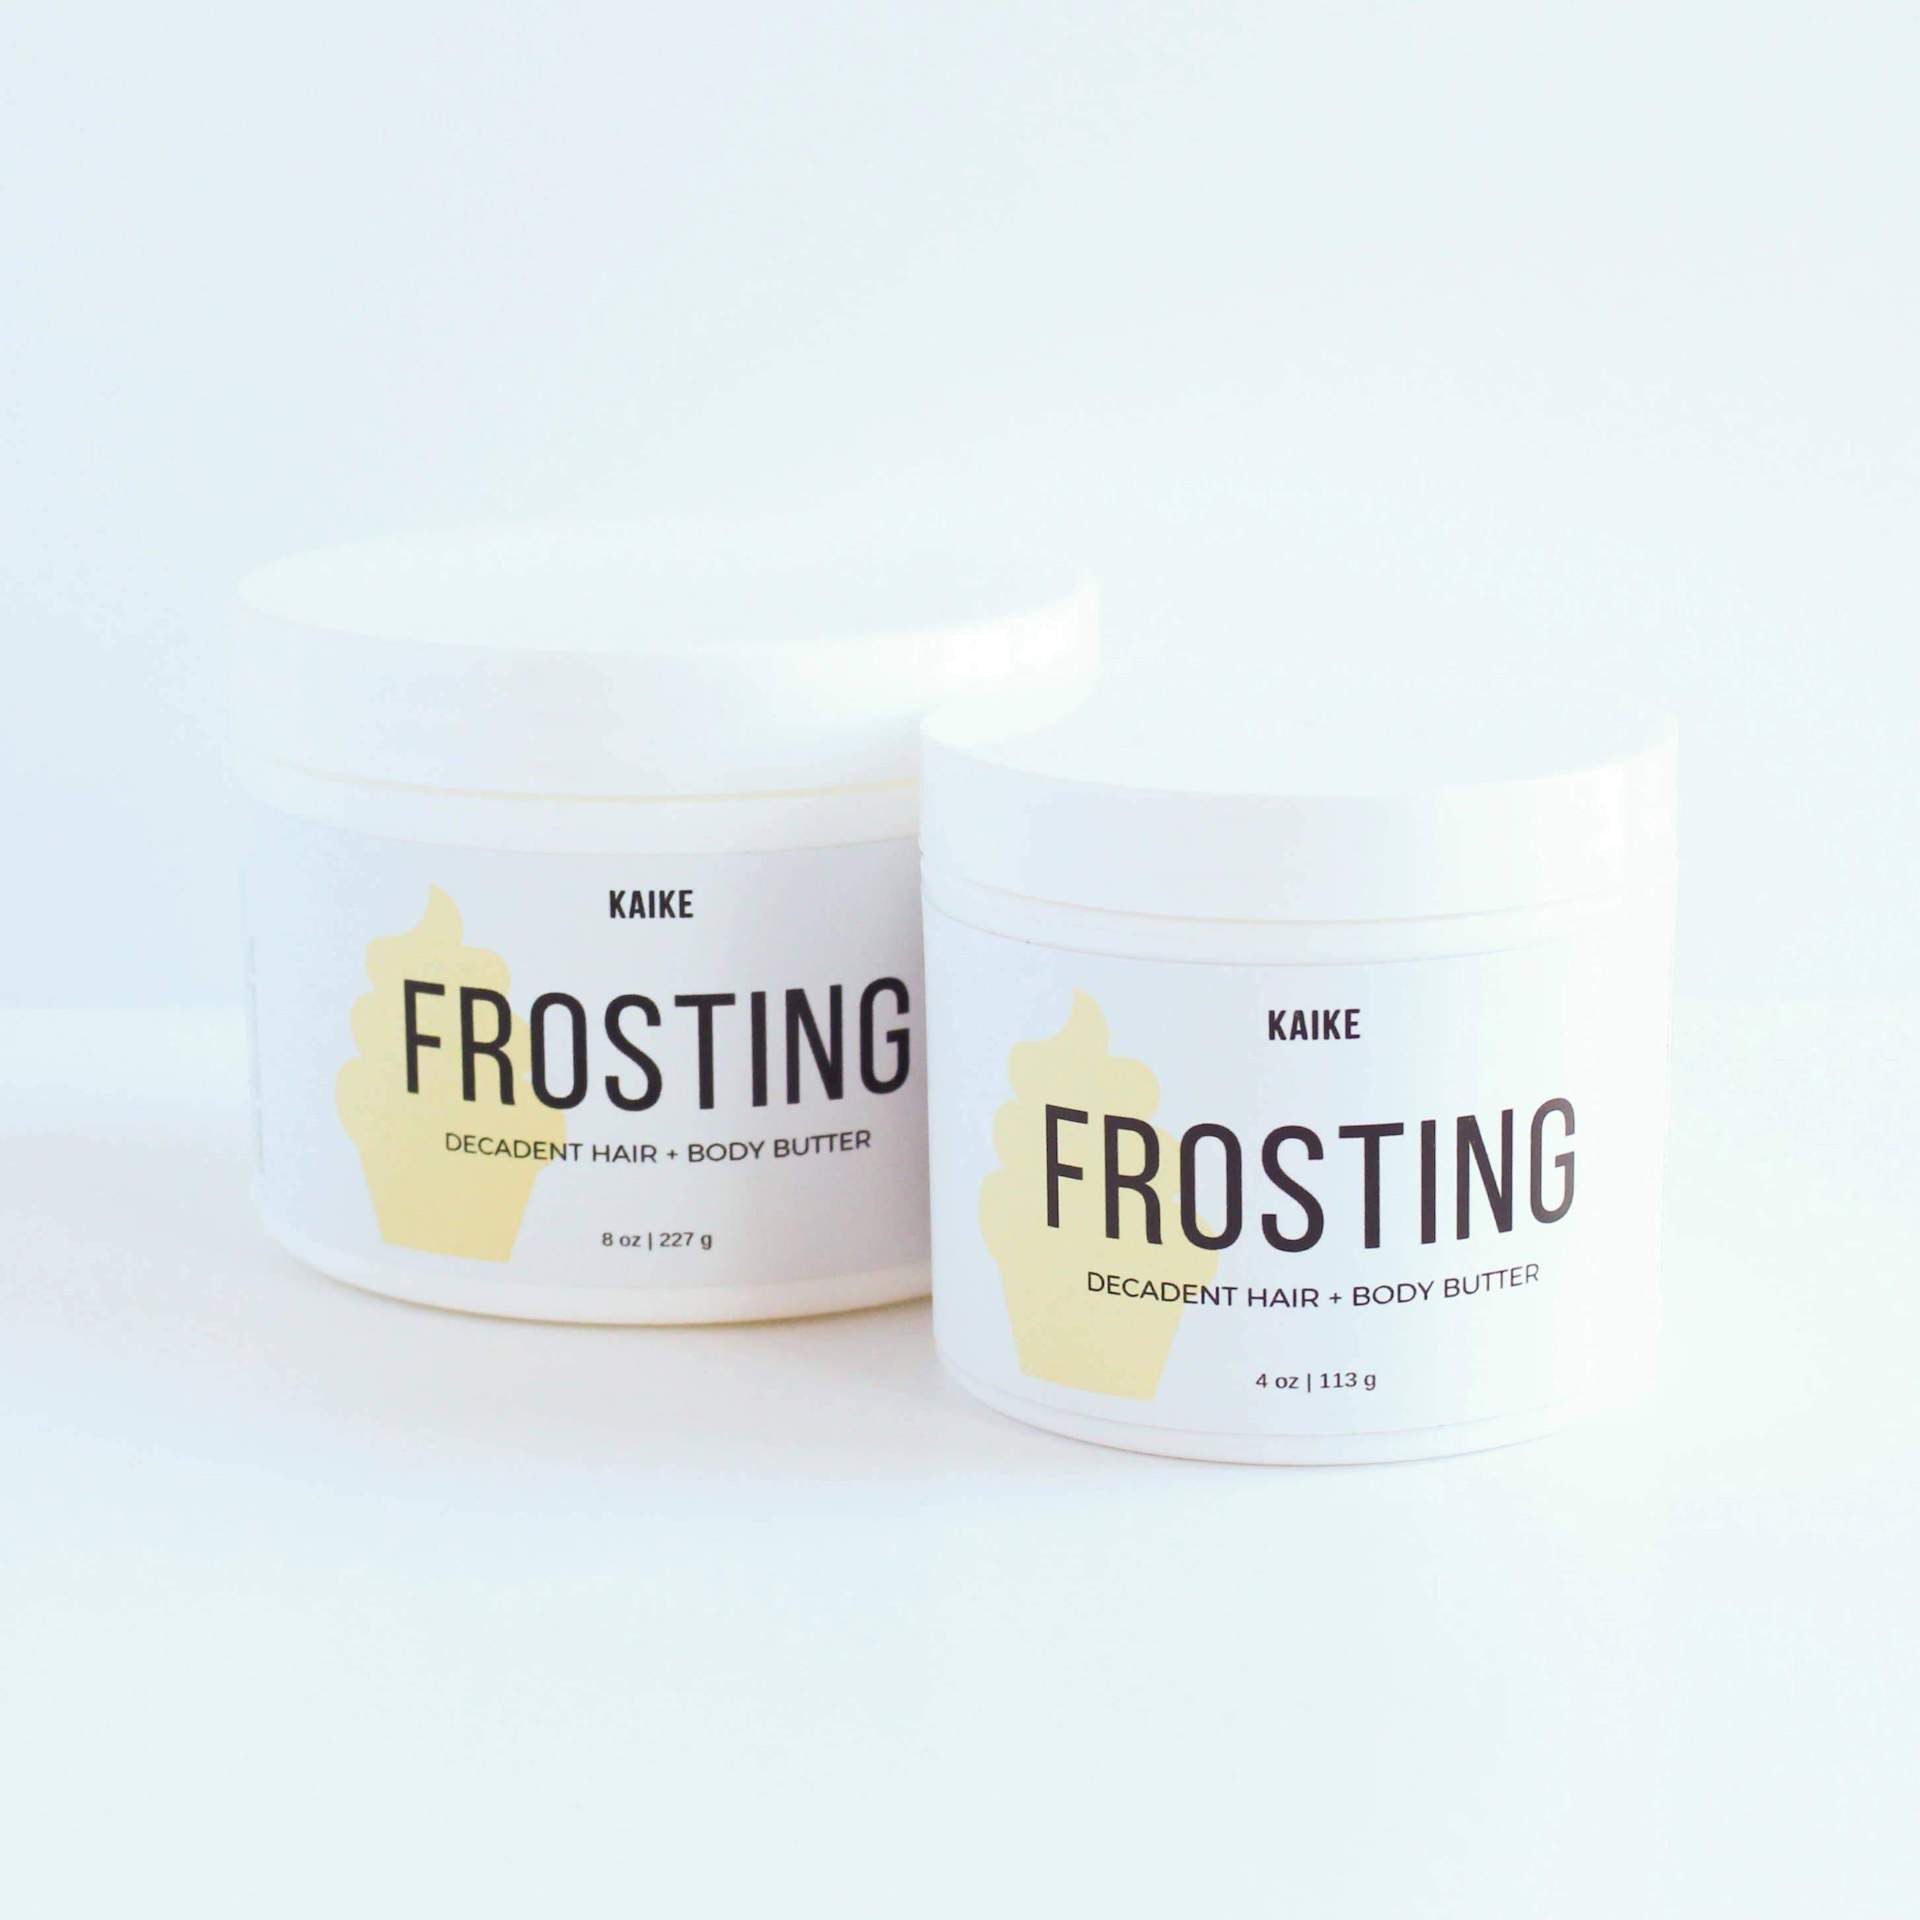 KAIKE frosting decadent hair and body butter on cvtd beauty